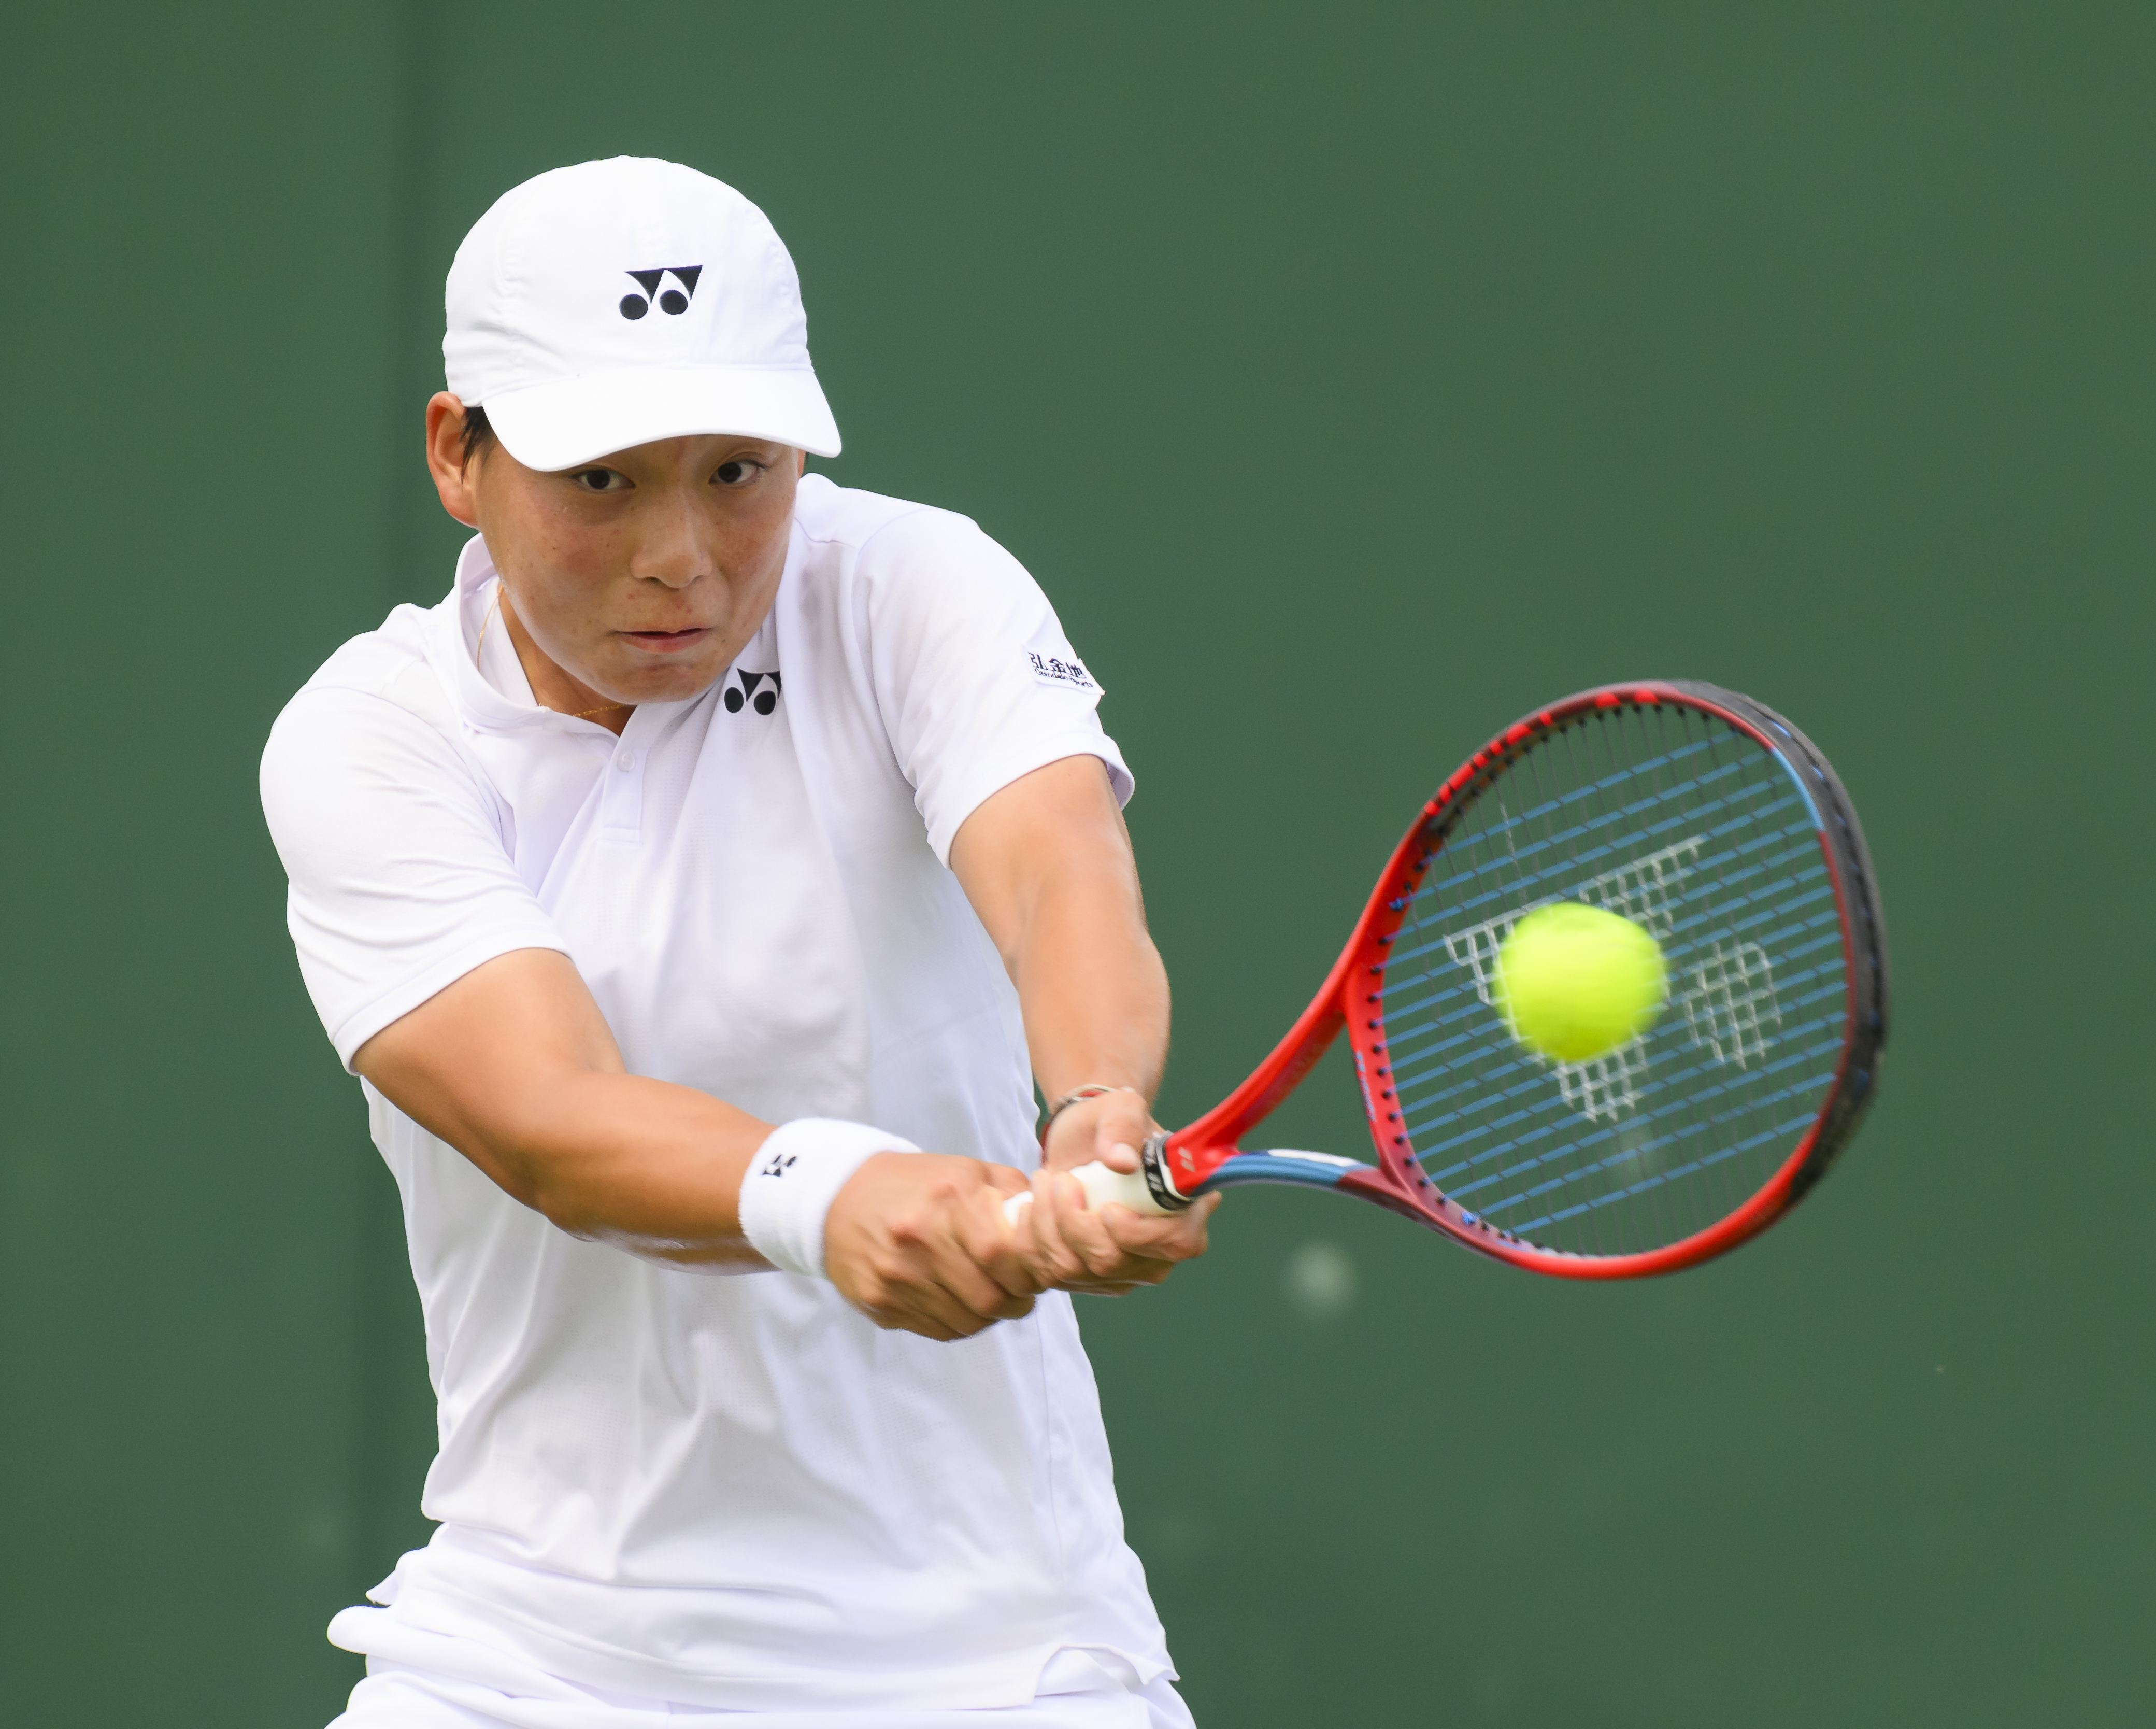 Bai Zhuoxuan of China competes in the Wimbledon Championships women's singles qualifying match against Anna Brogan of Britain at Community Sport Centre Roehampton in London, England, June 29, 2023. /CFP

